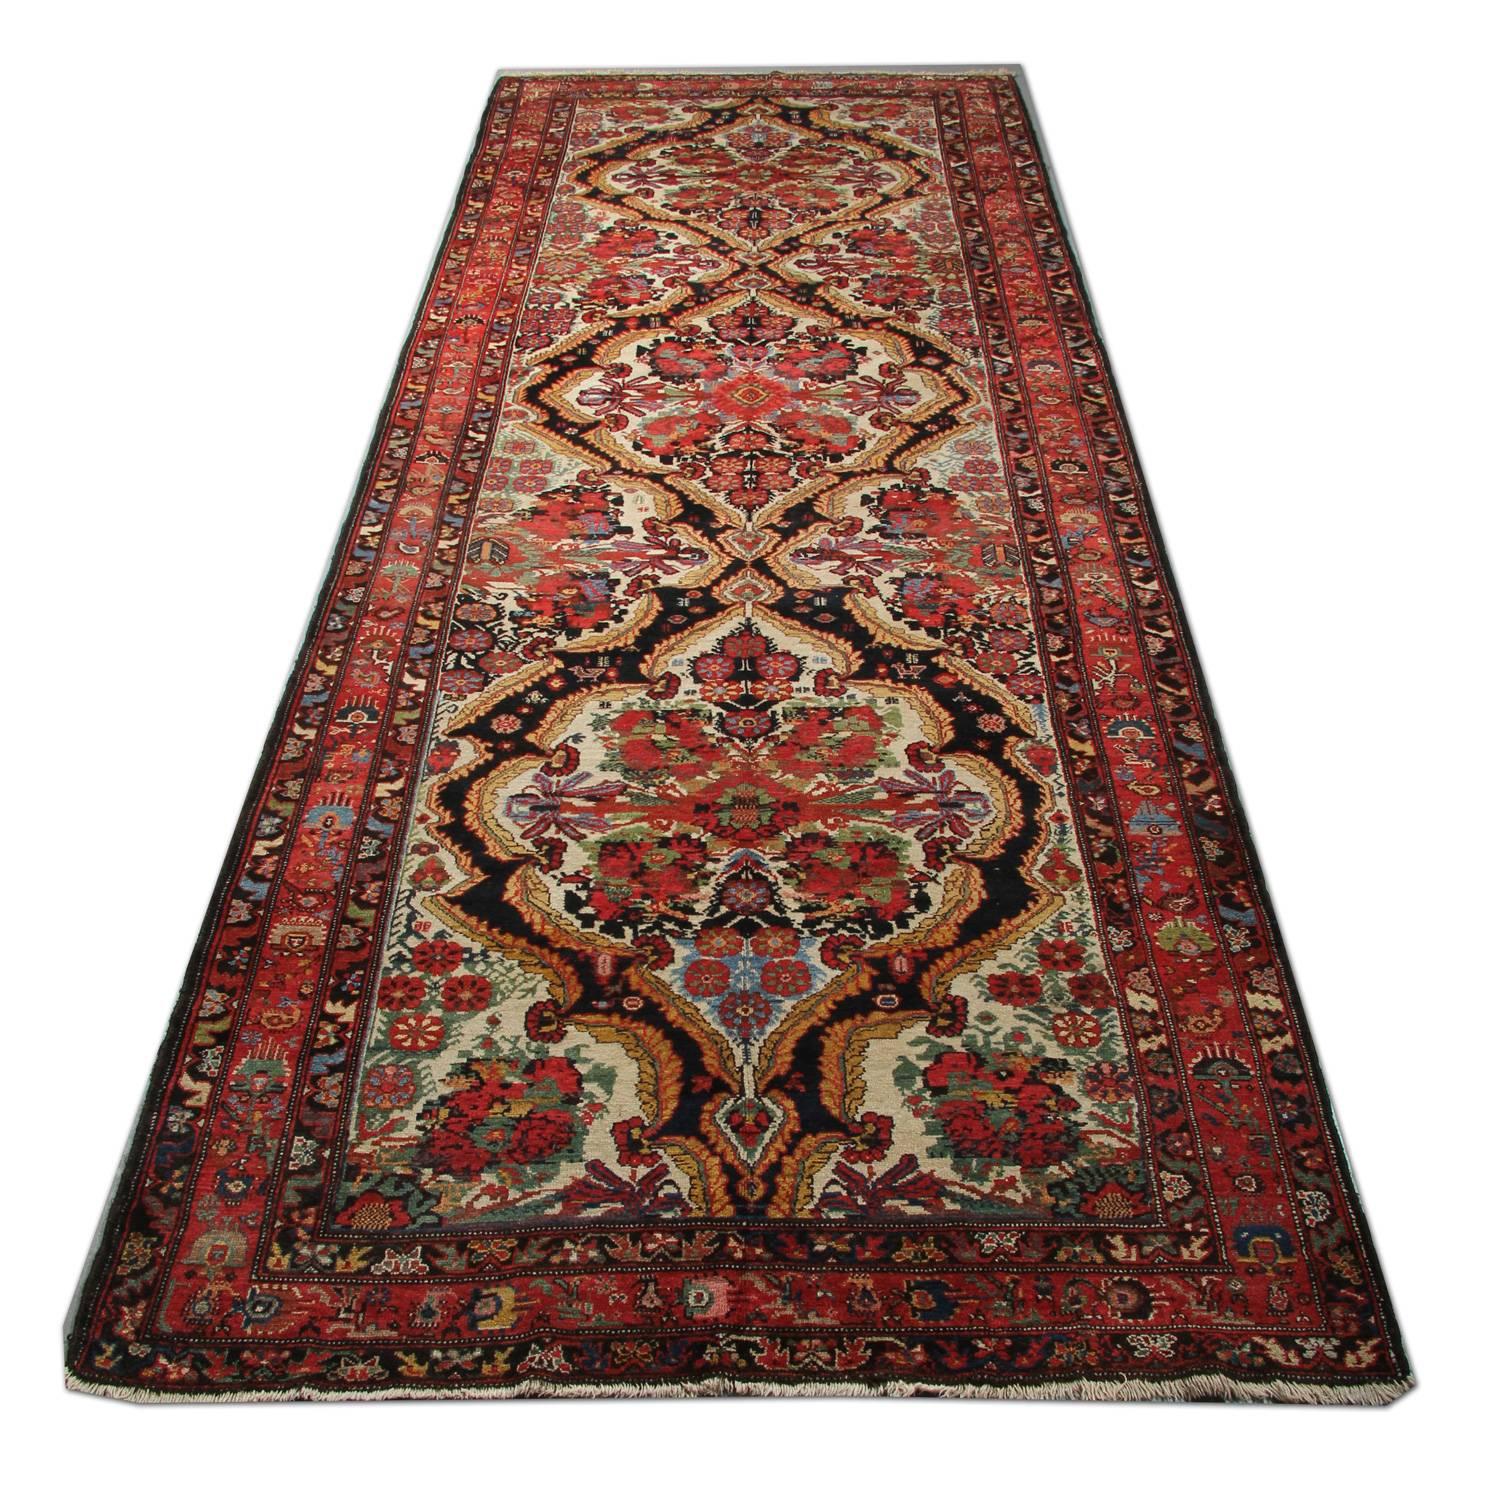 This fine wool rug was handwoven in Caucasia, Azerbaijan, in 1940. featuring a floral botanical central design hand-knotted with handspun wool and cotton. The vibrant colours have been dyed using vegetable dyes, rich reds, and greens sit side by